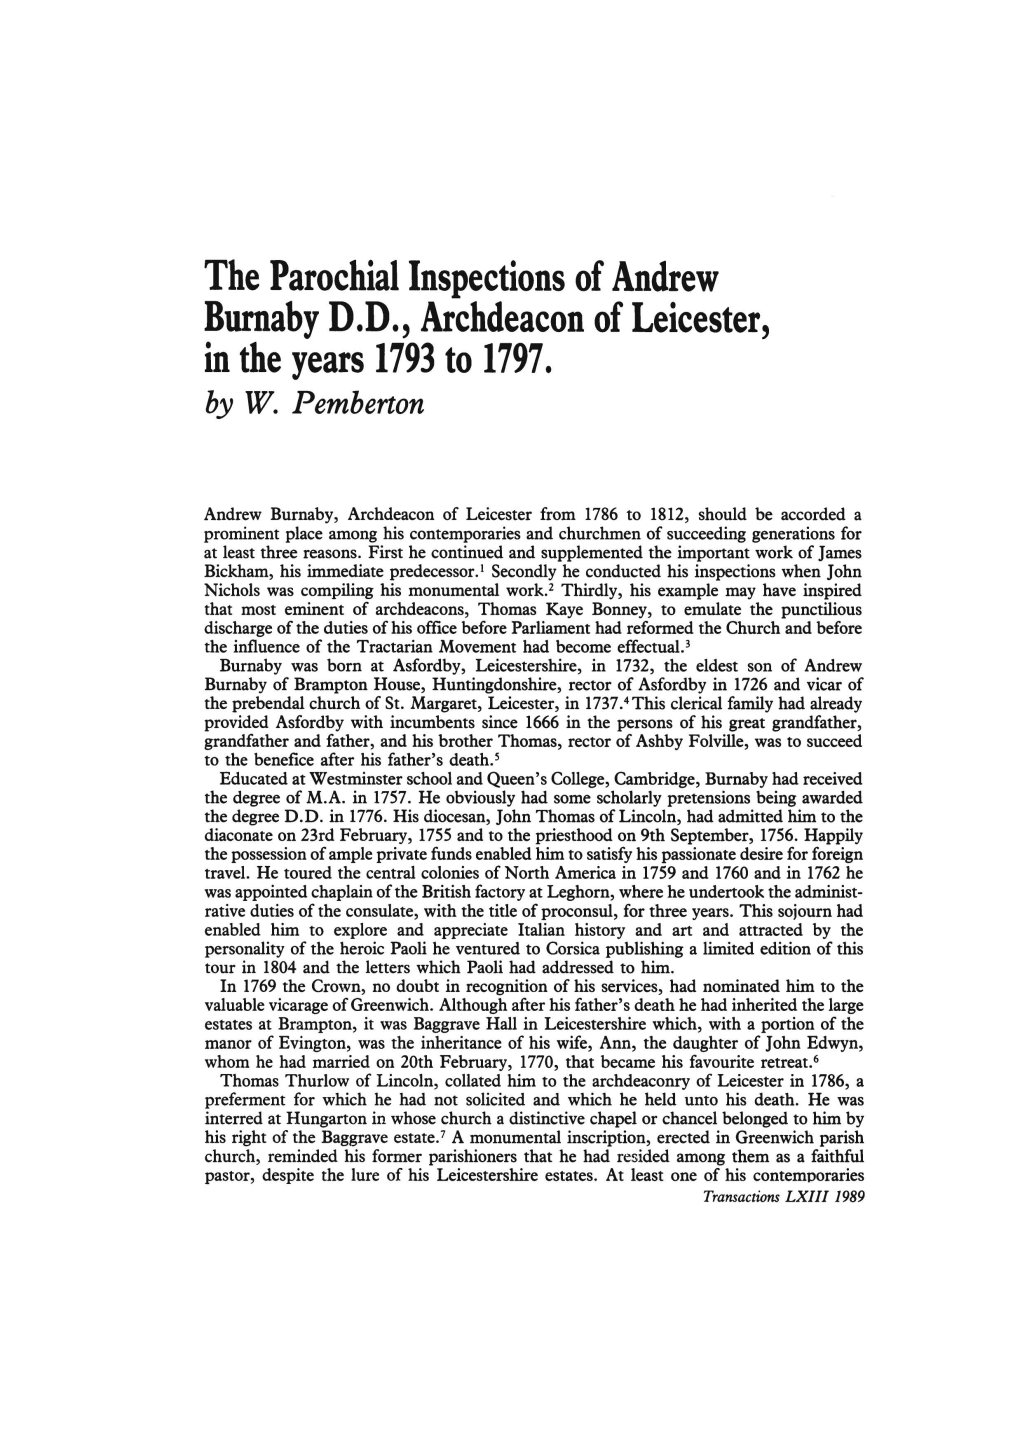 The Parochial Inspections of Andrew Burnaby D.D., Archdeacon of Leicester, in the Years 1793 to 1797